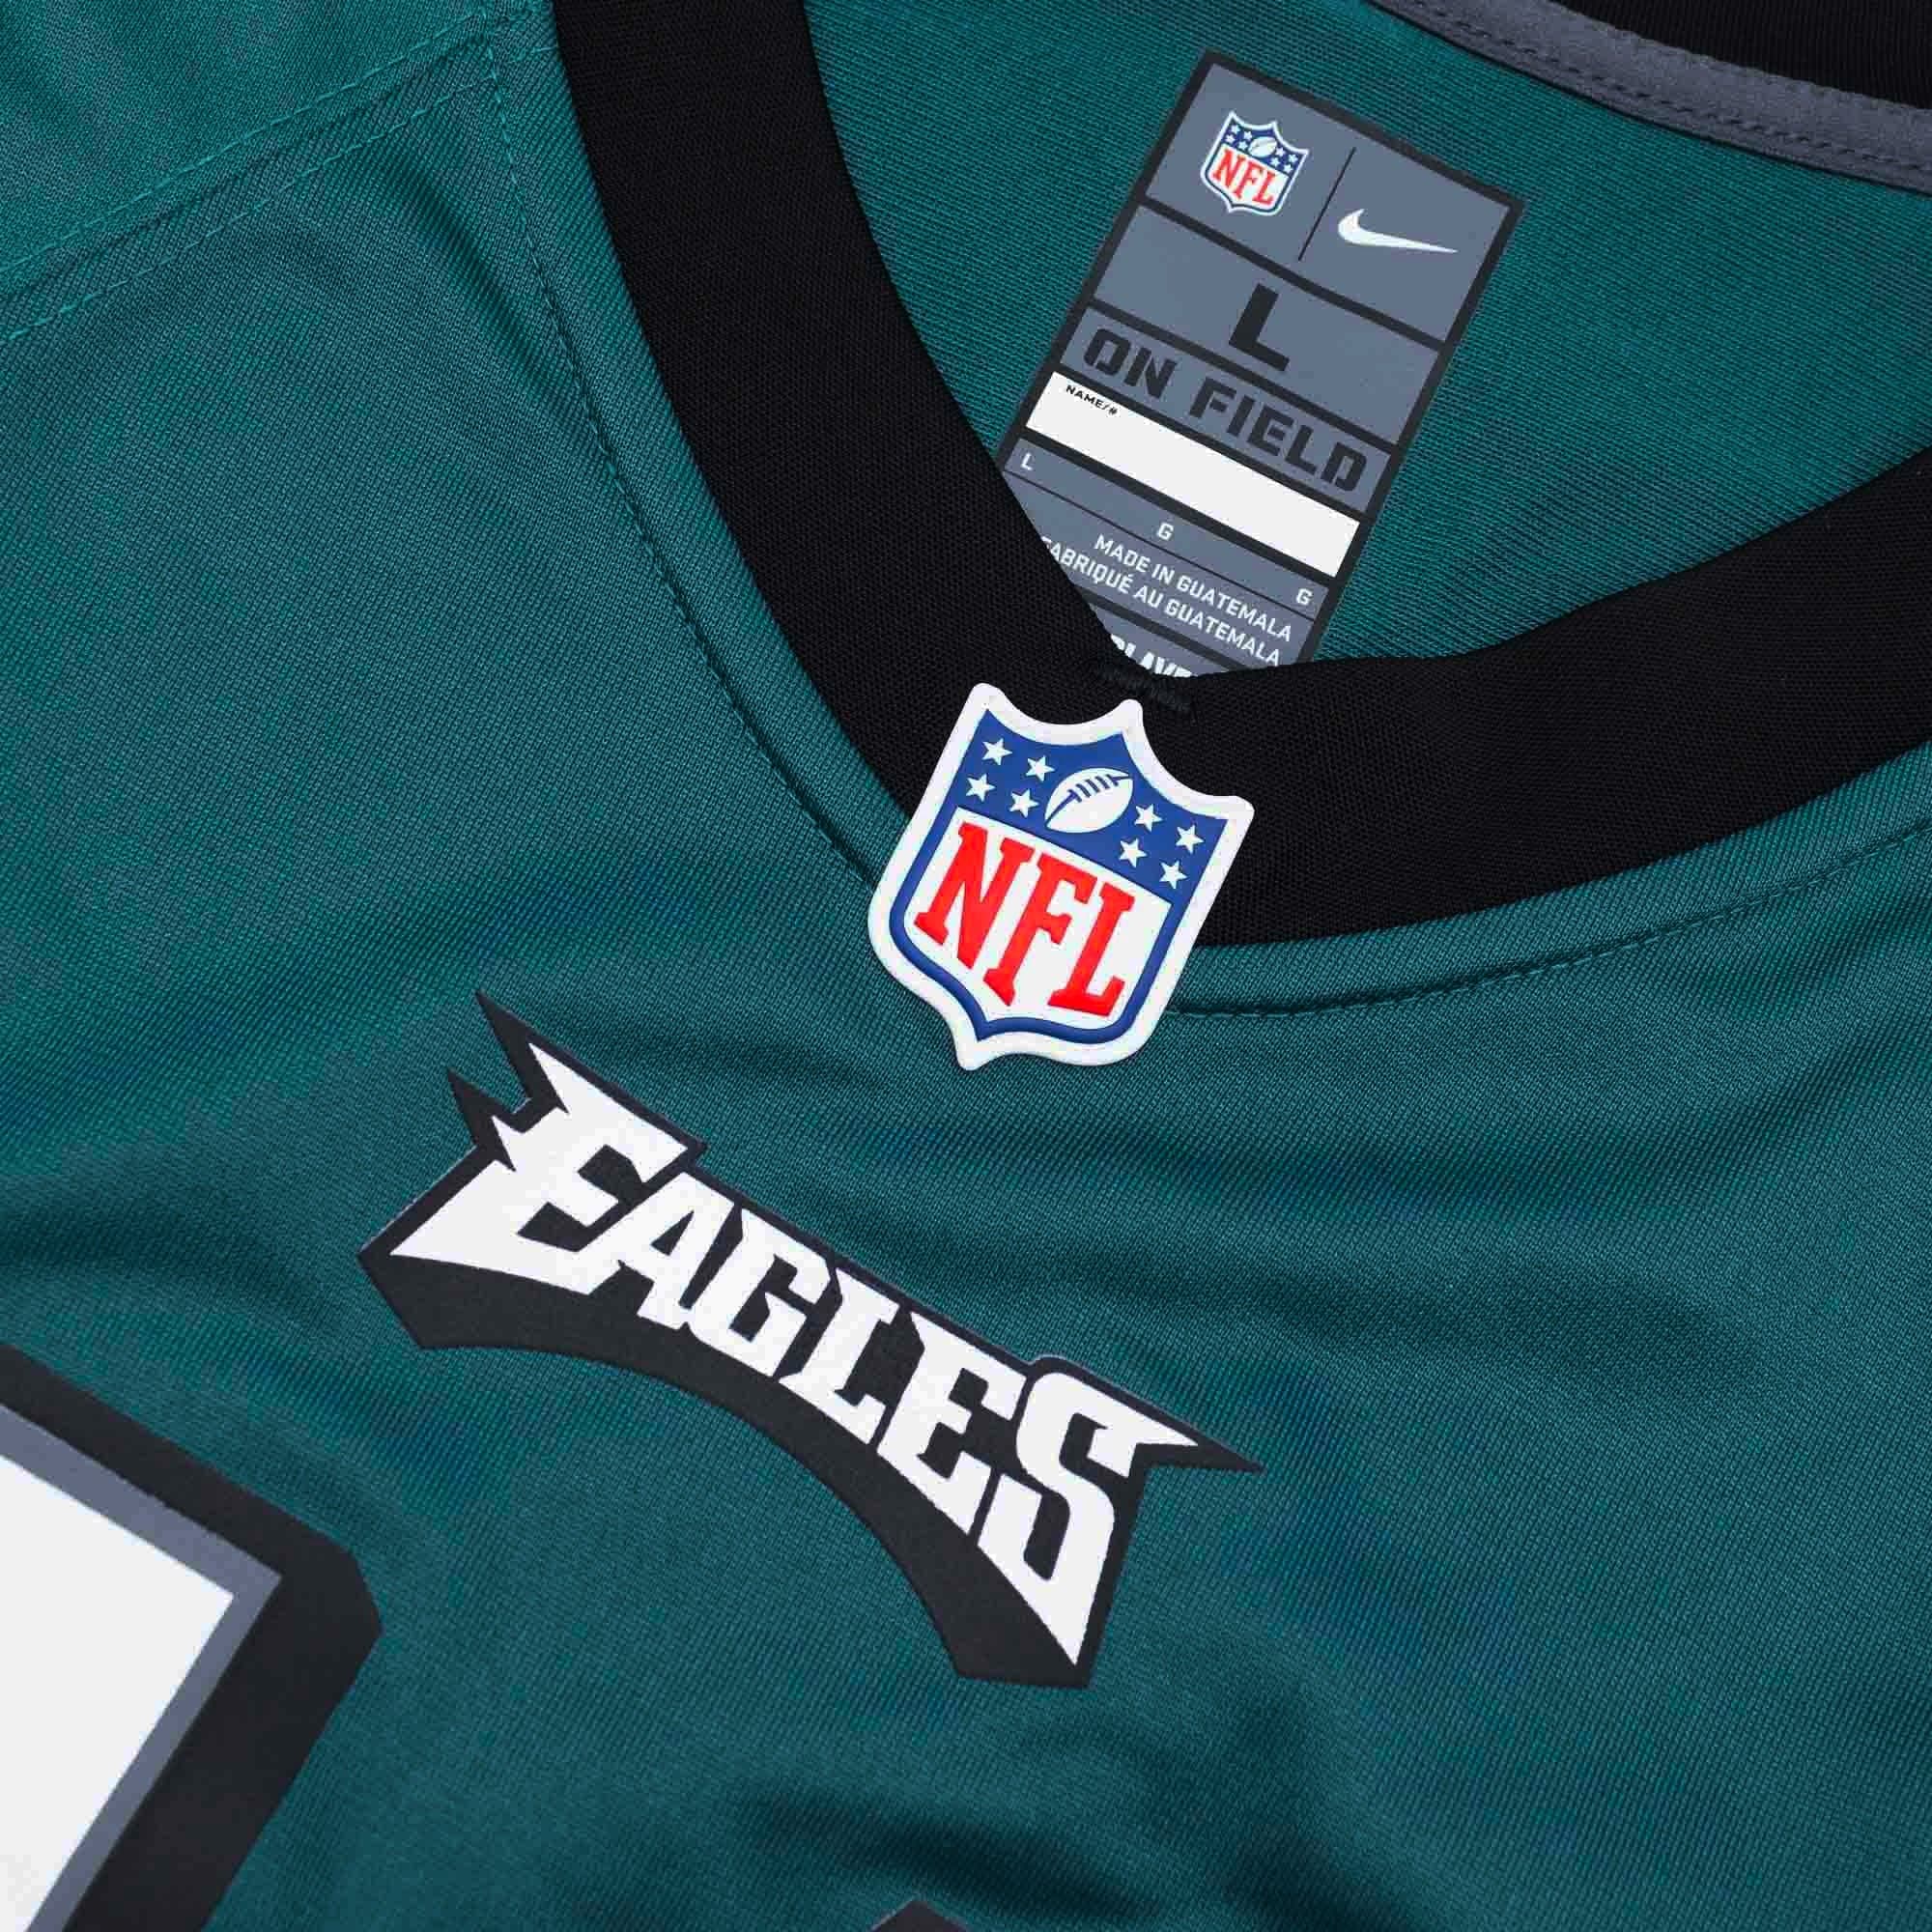 A.J. Brown Philadelphia Eagles Nike Youth Game Jersey - Green